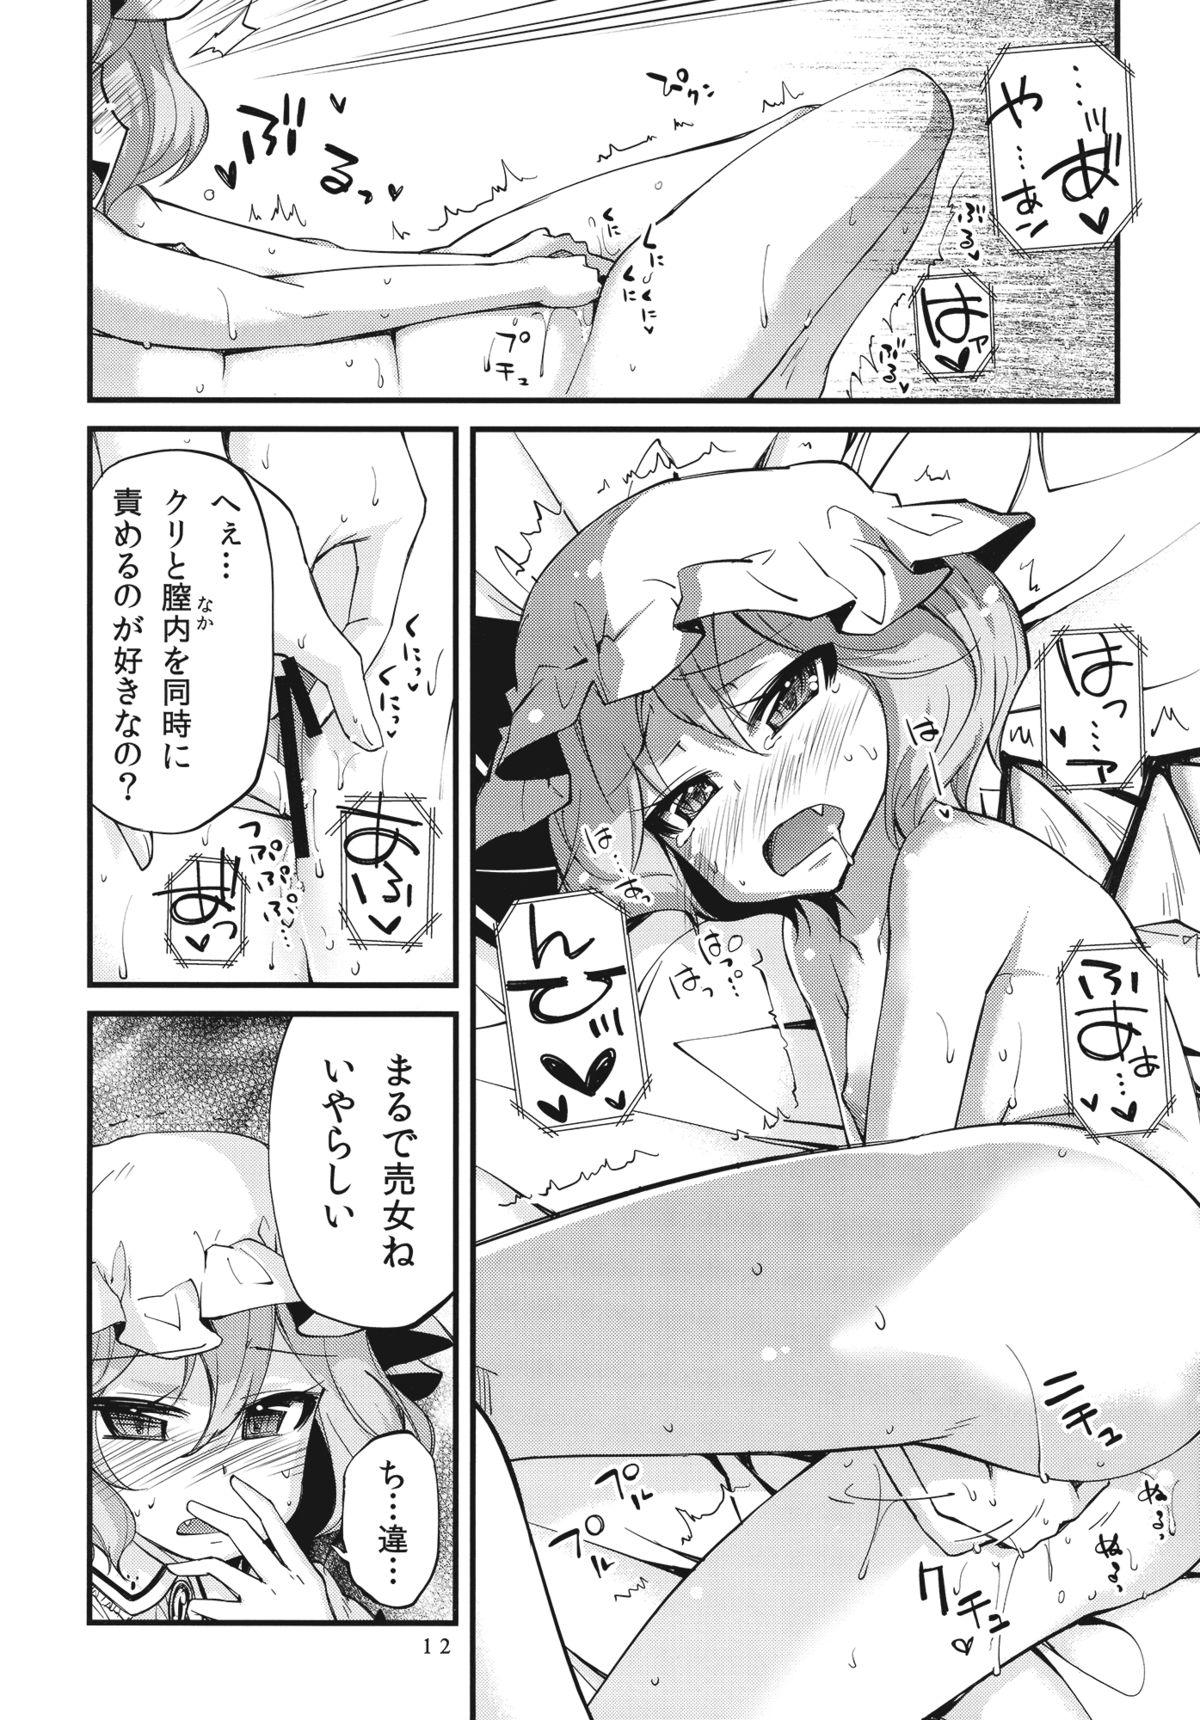 Nurumassage .REC - Touhou project Lovers - Page 12